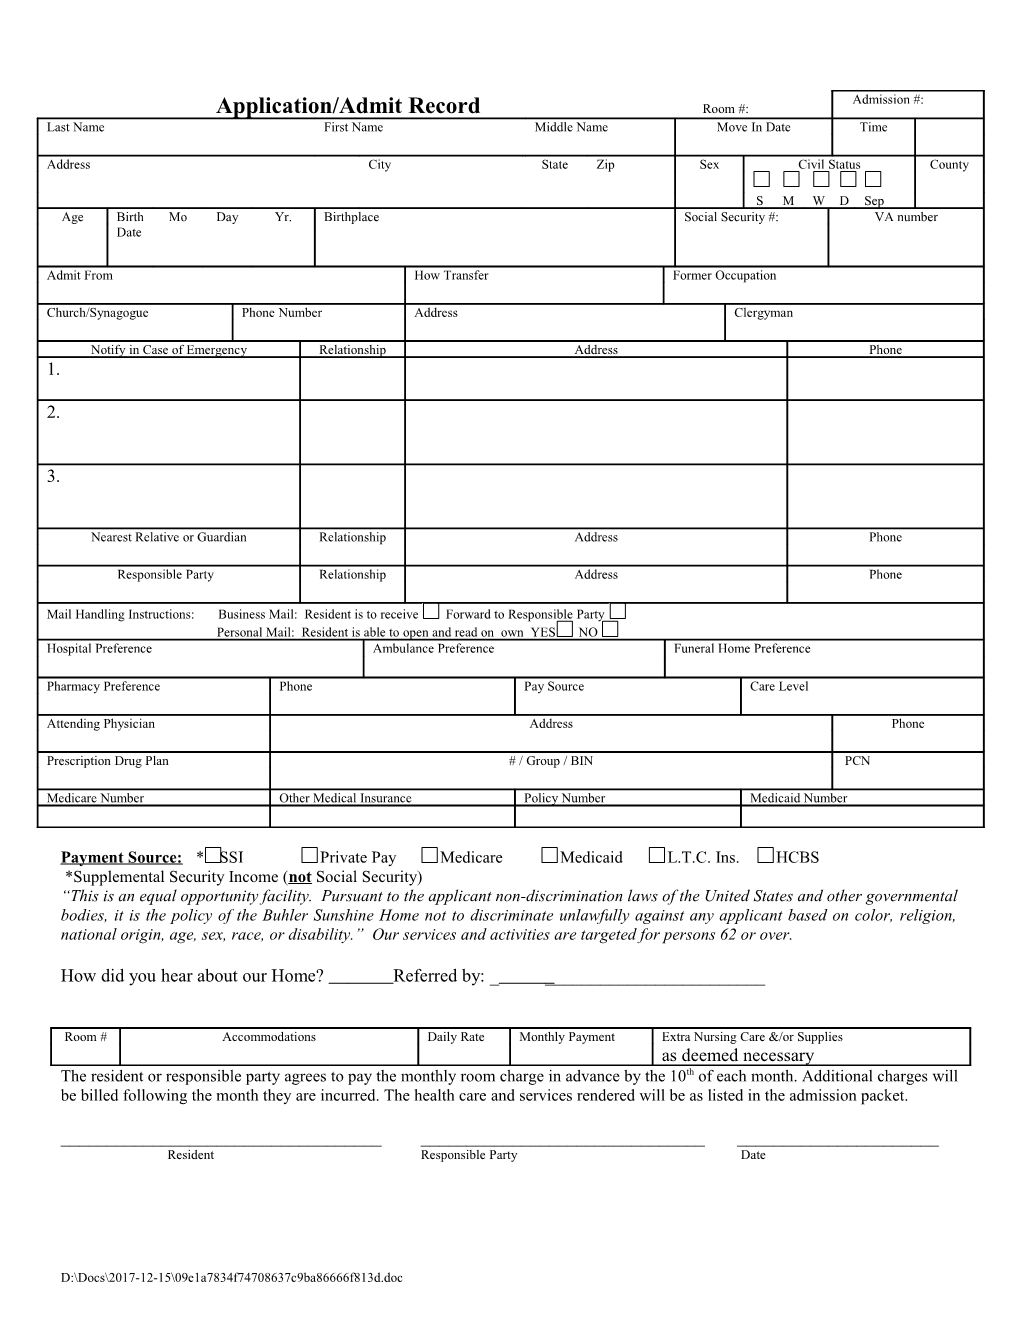 Admission and Discharge Record